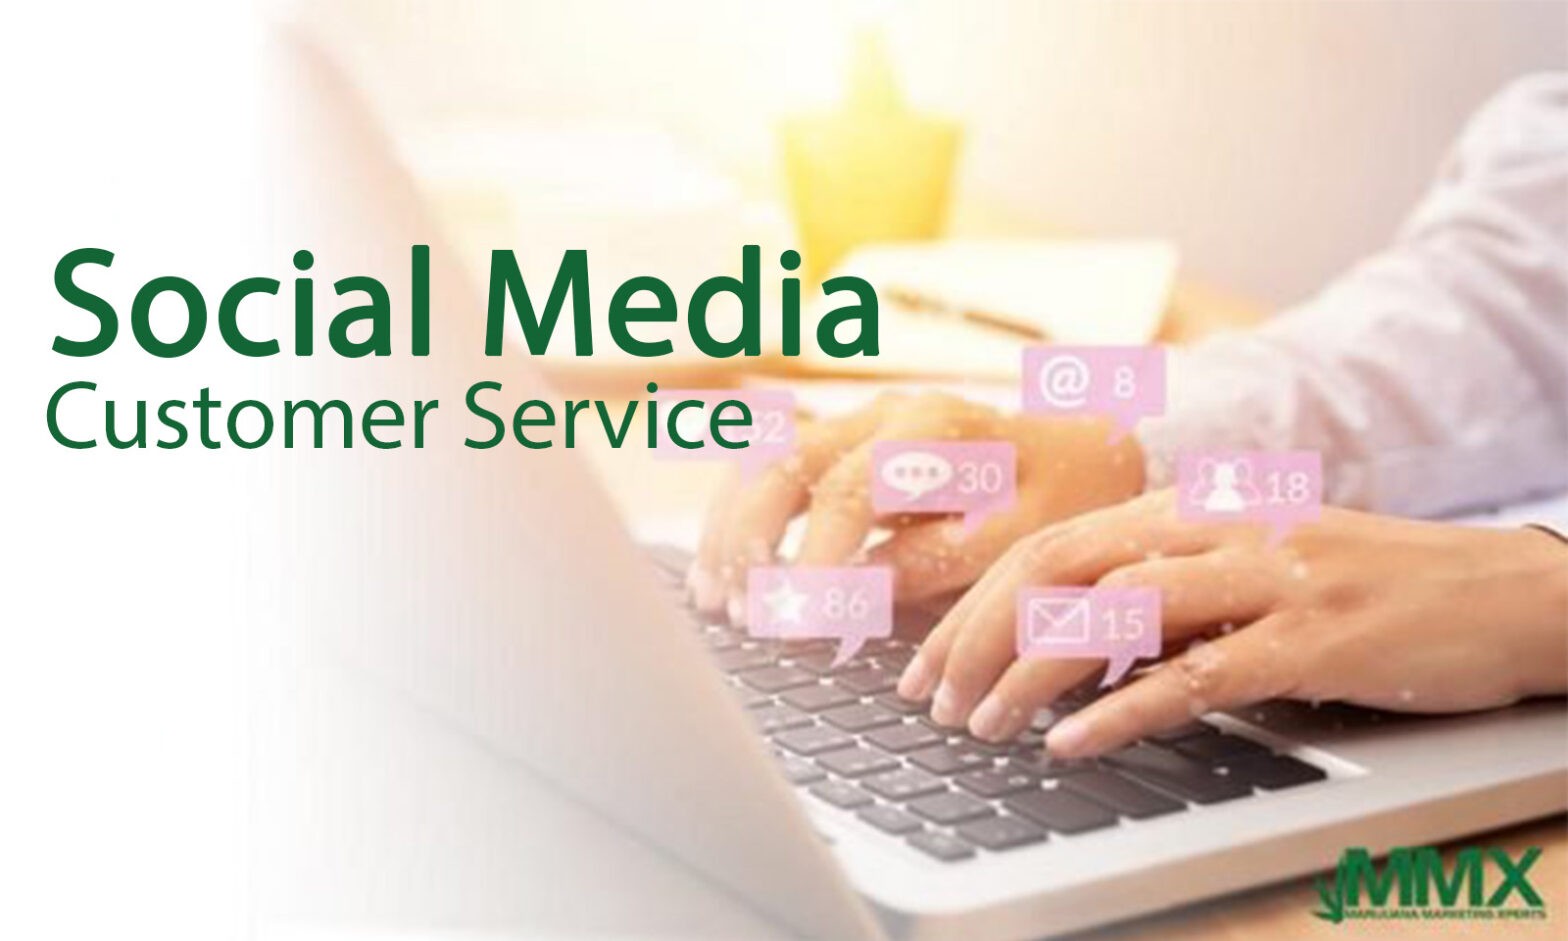 Social Customer Service Matters More Than You Think